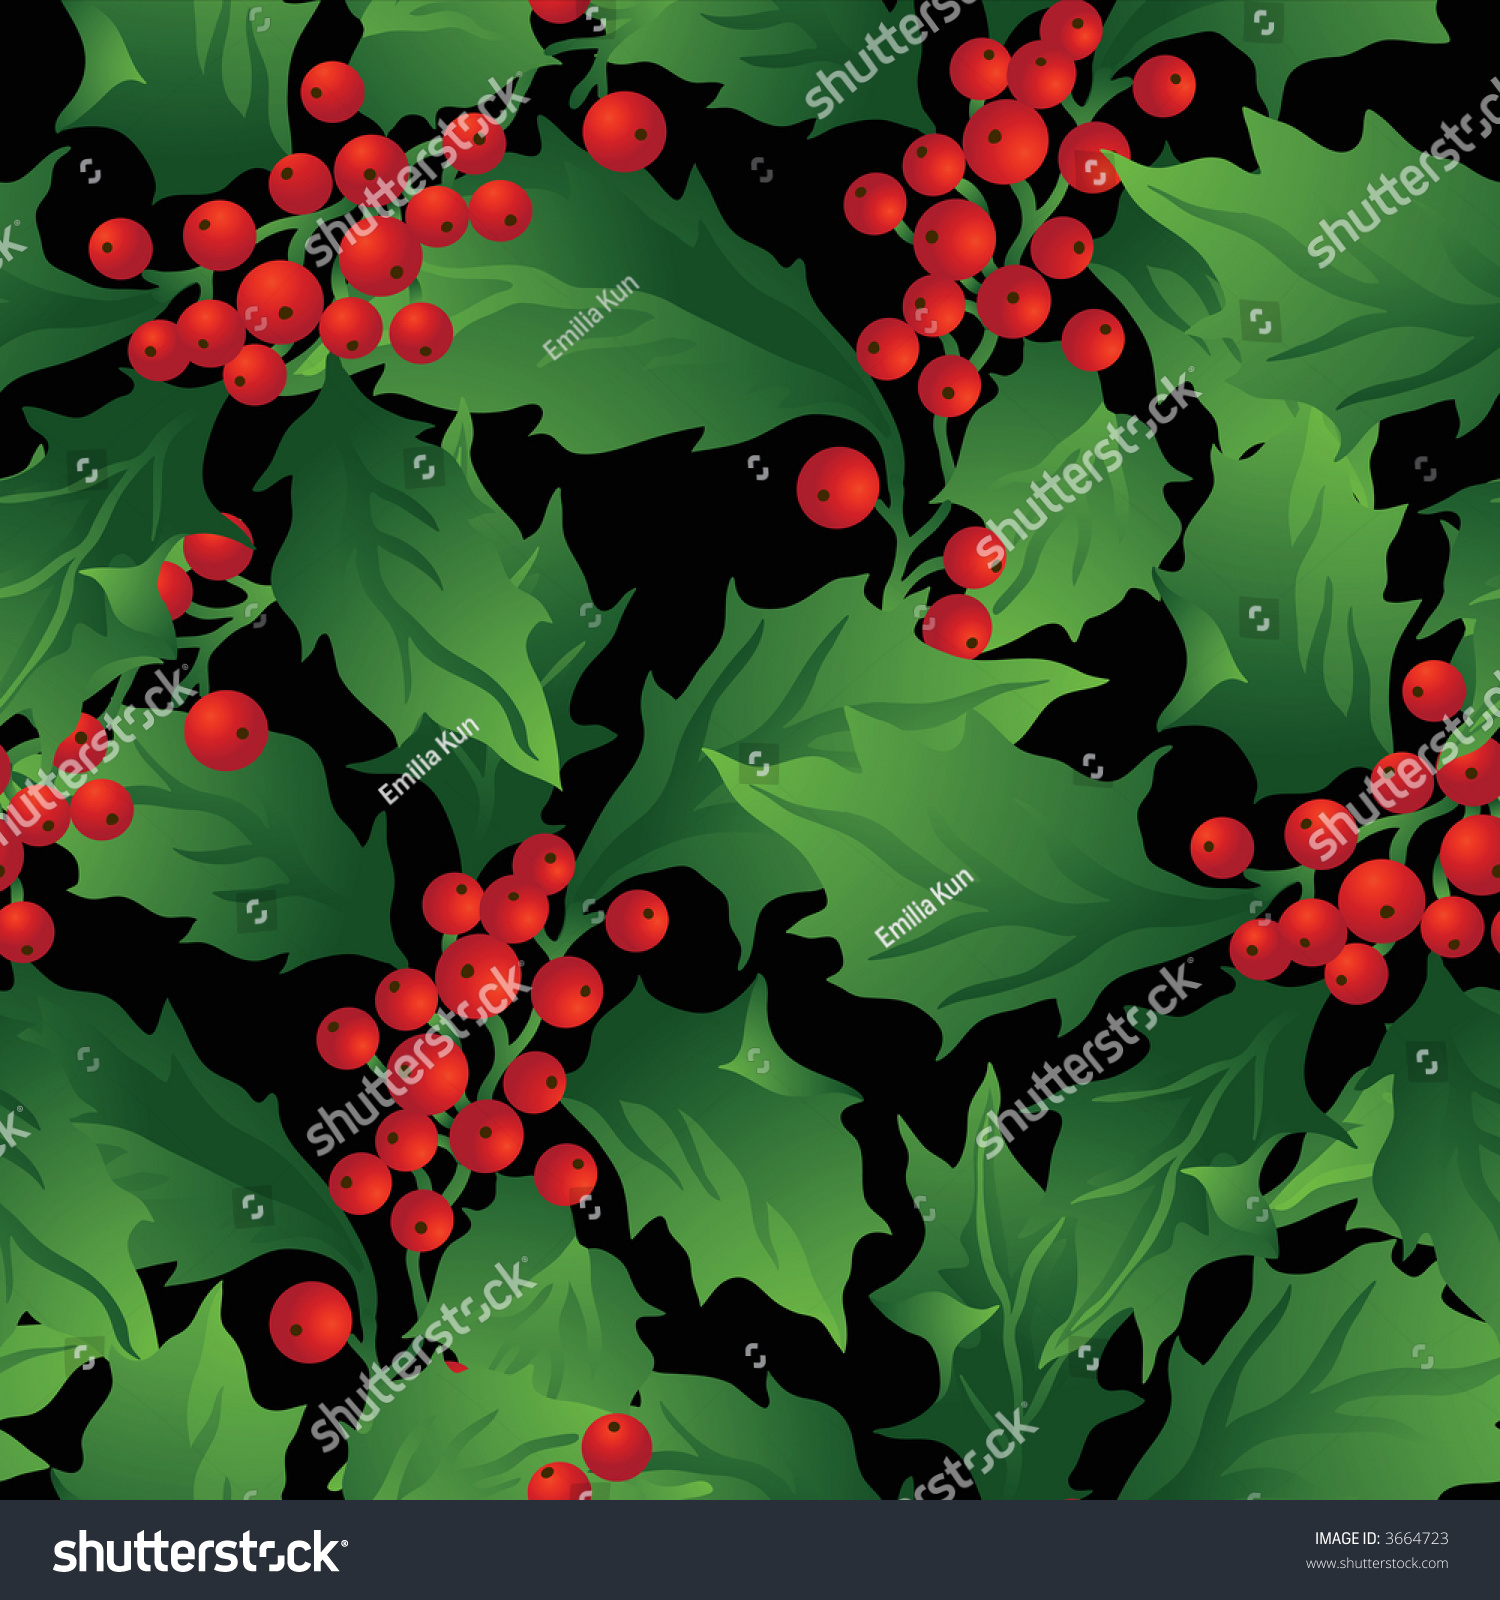 Green Holly Leaves Red Berries Repeat Stock Illustration 3664723 ...